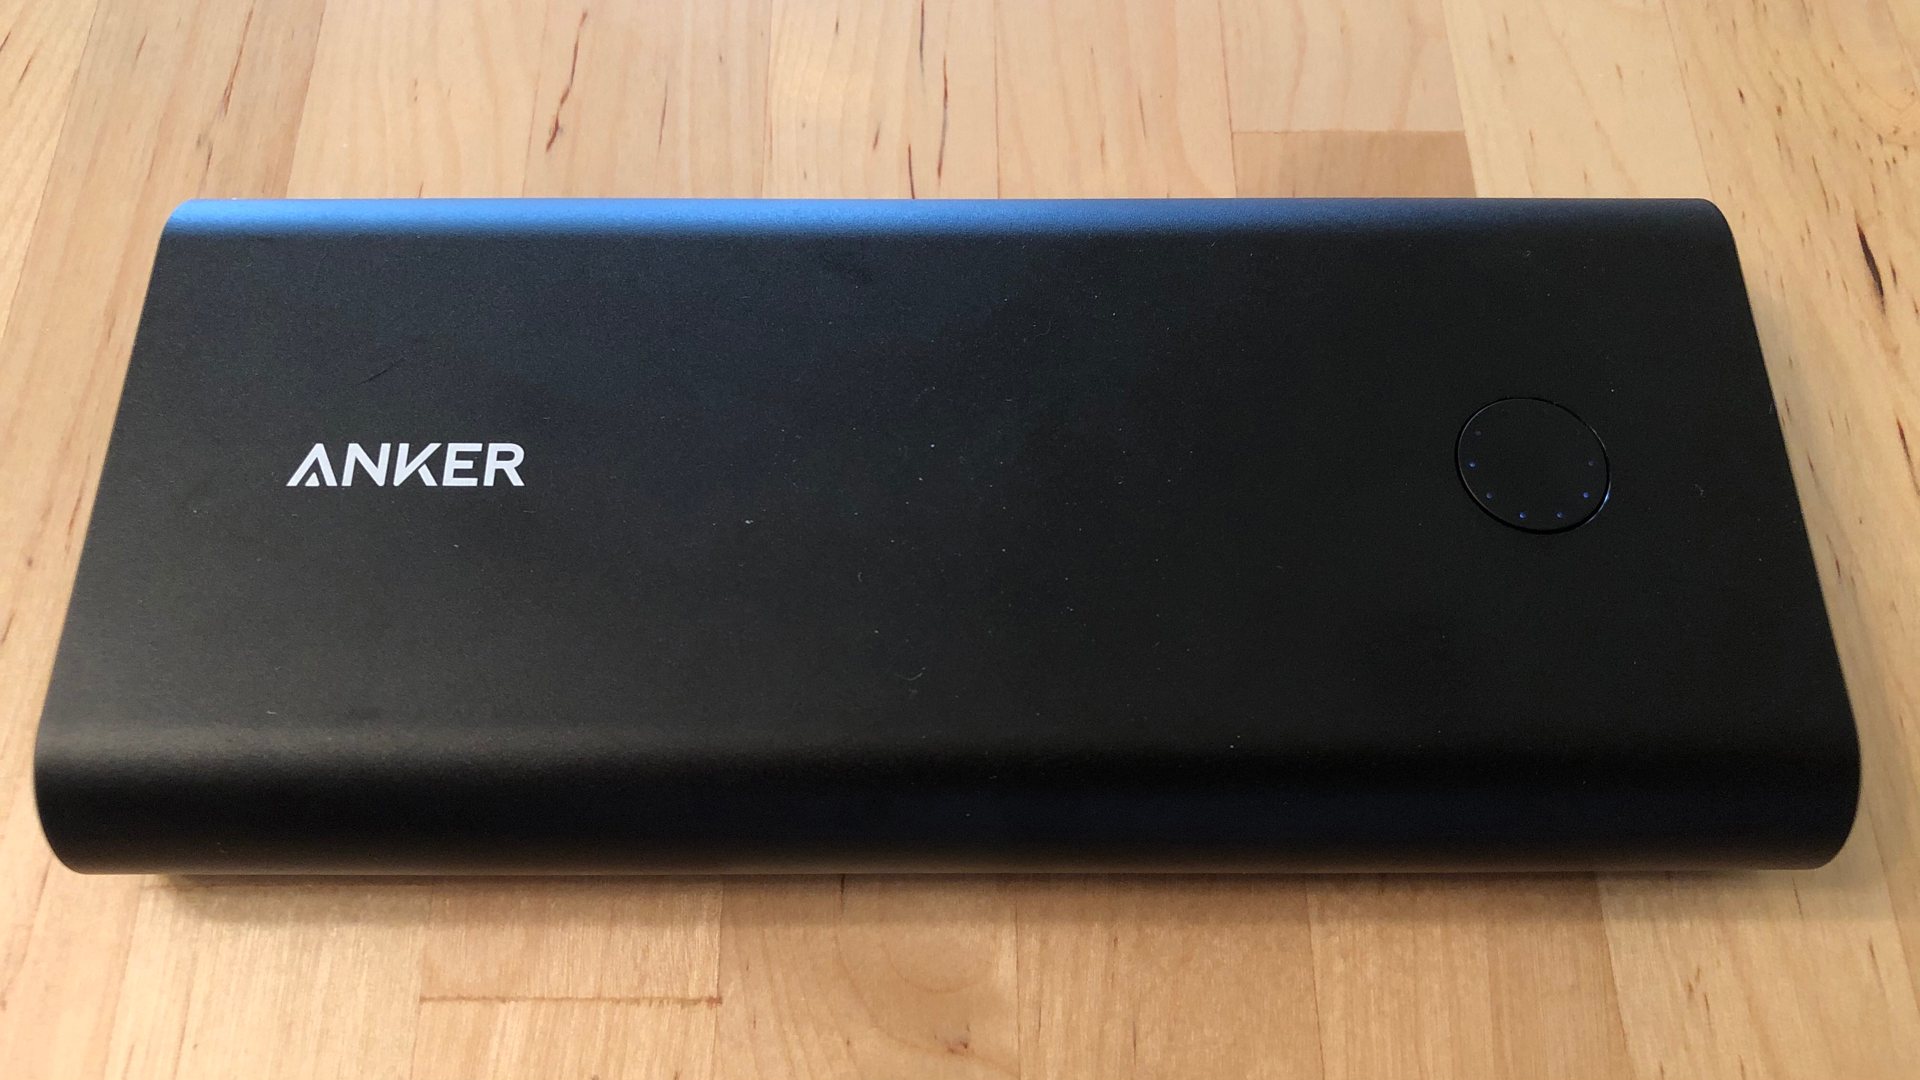 26800-mah-power-bank-how-many-charges